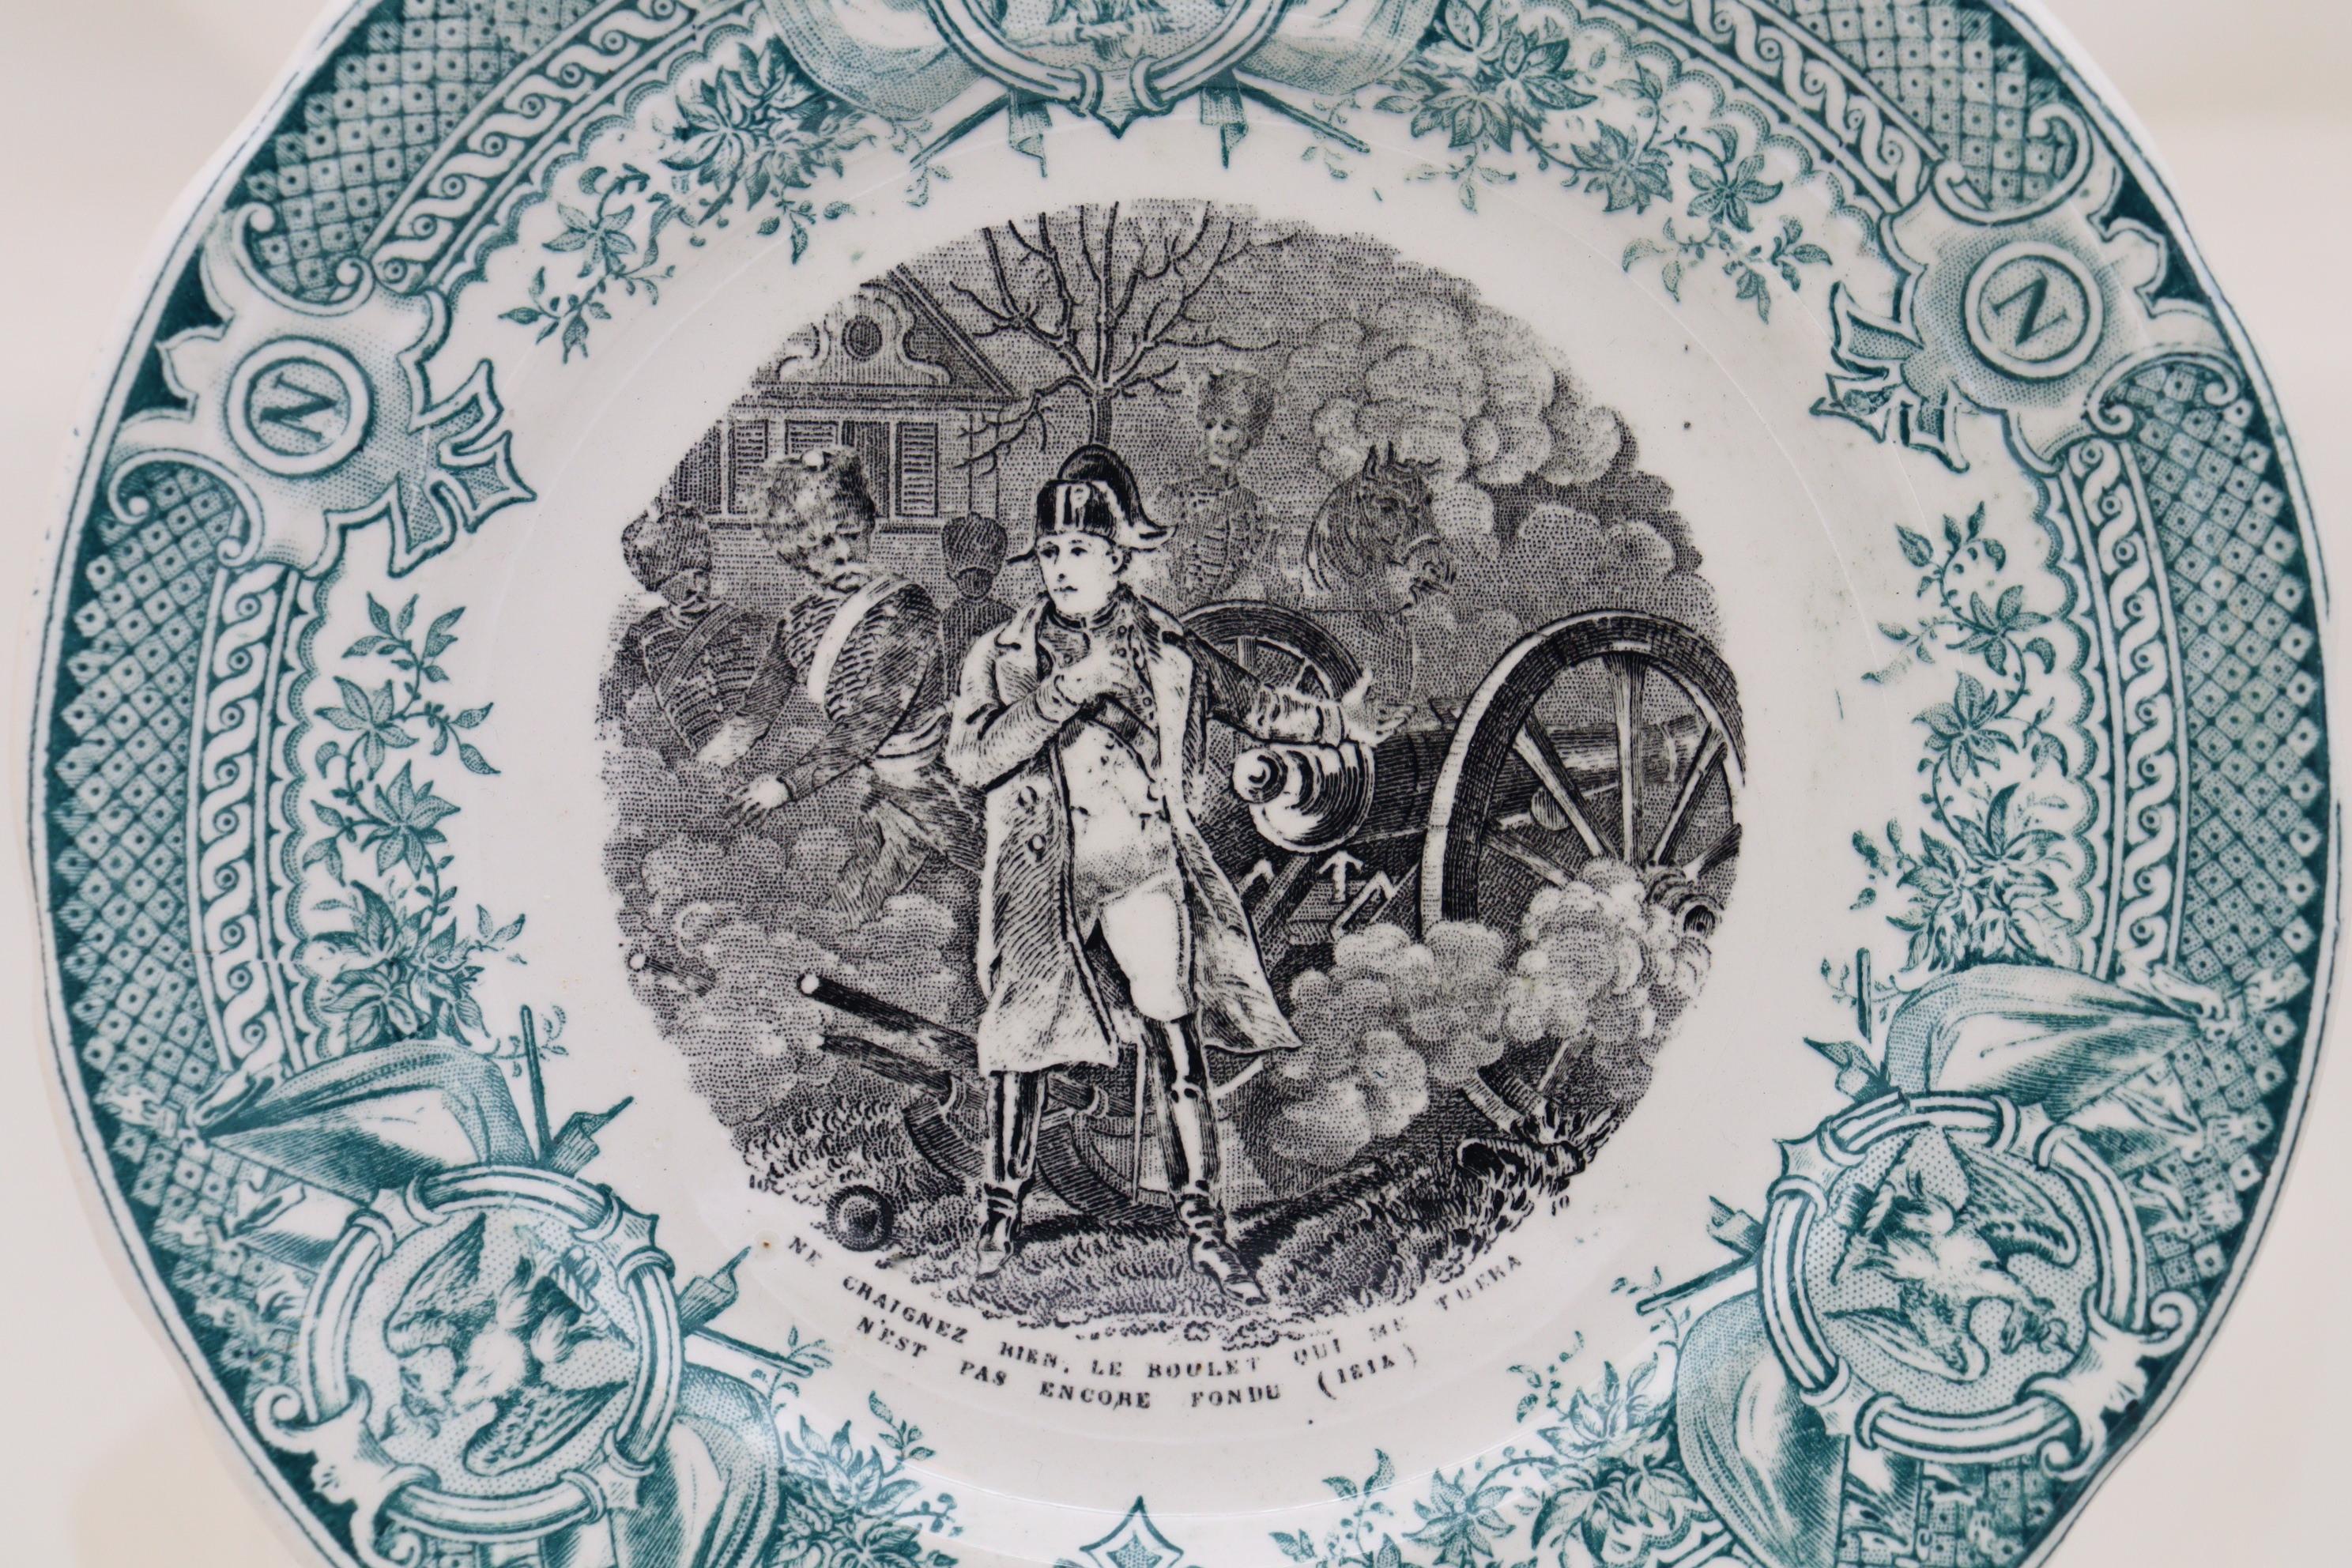 These three Sarreguemines side plates are decorated with different transfer printed scenes of Napoleon's battles, in black, to the centre, within an intricate aqua coloured printed border. Beneath each scene is the individual caption in French. They